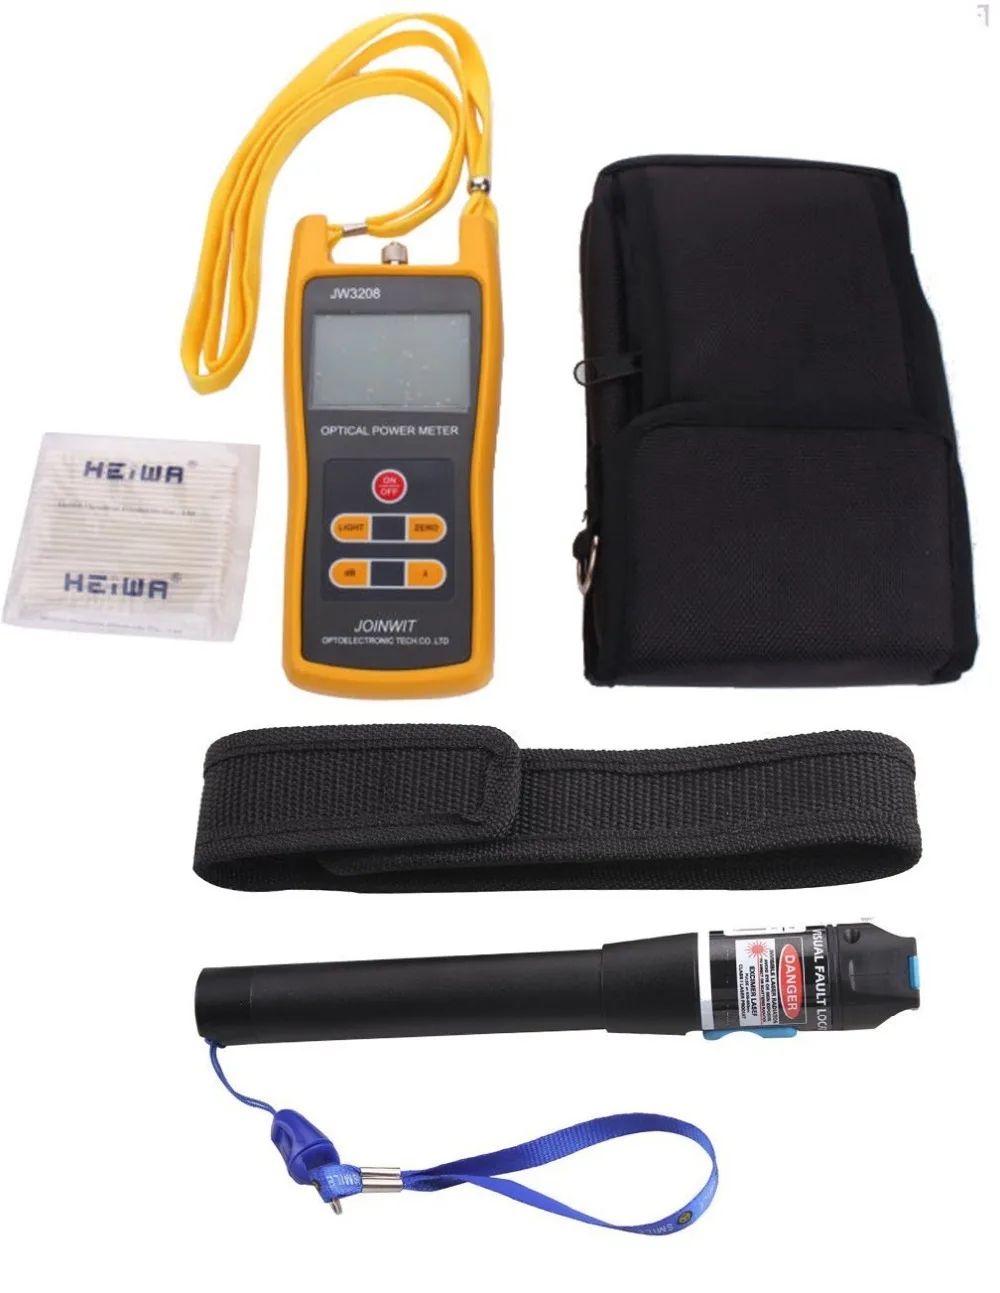 20mW Visual Fault Locator Fiber Optic Cable Tester  Optical Laser Source &Handheld Optical Power Meter Tester -50 to26dB